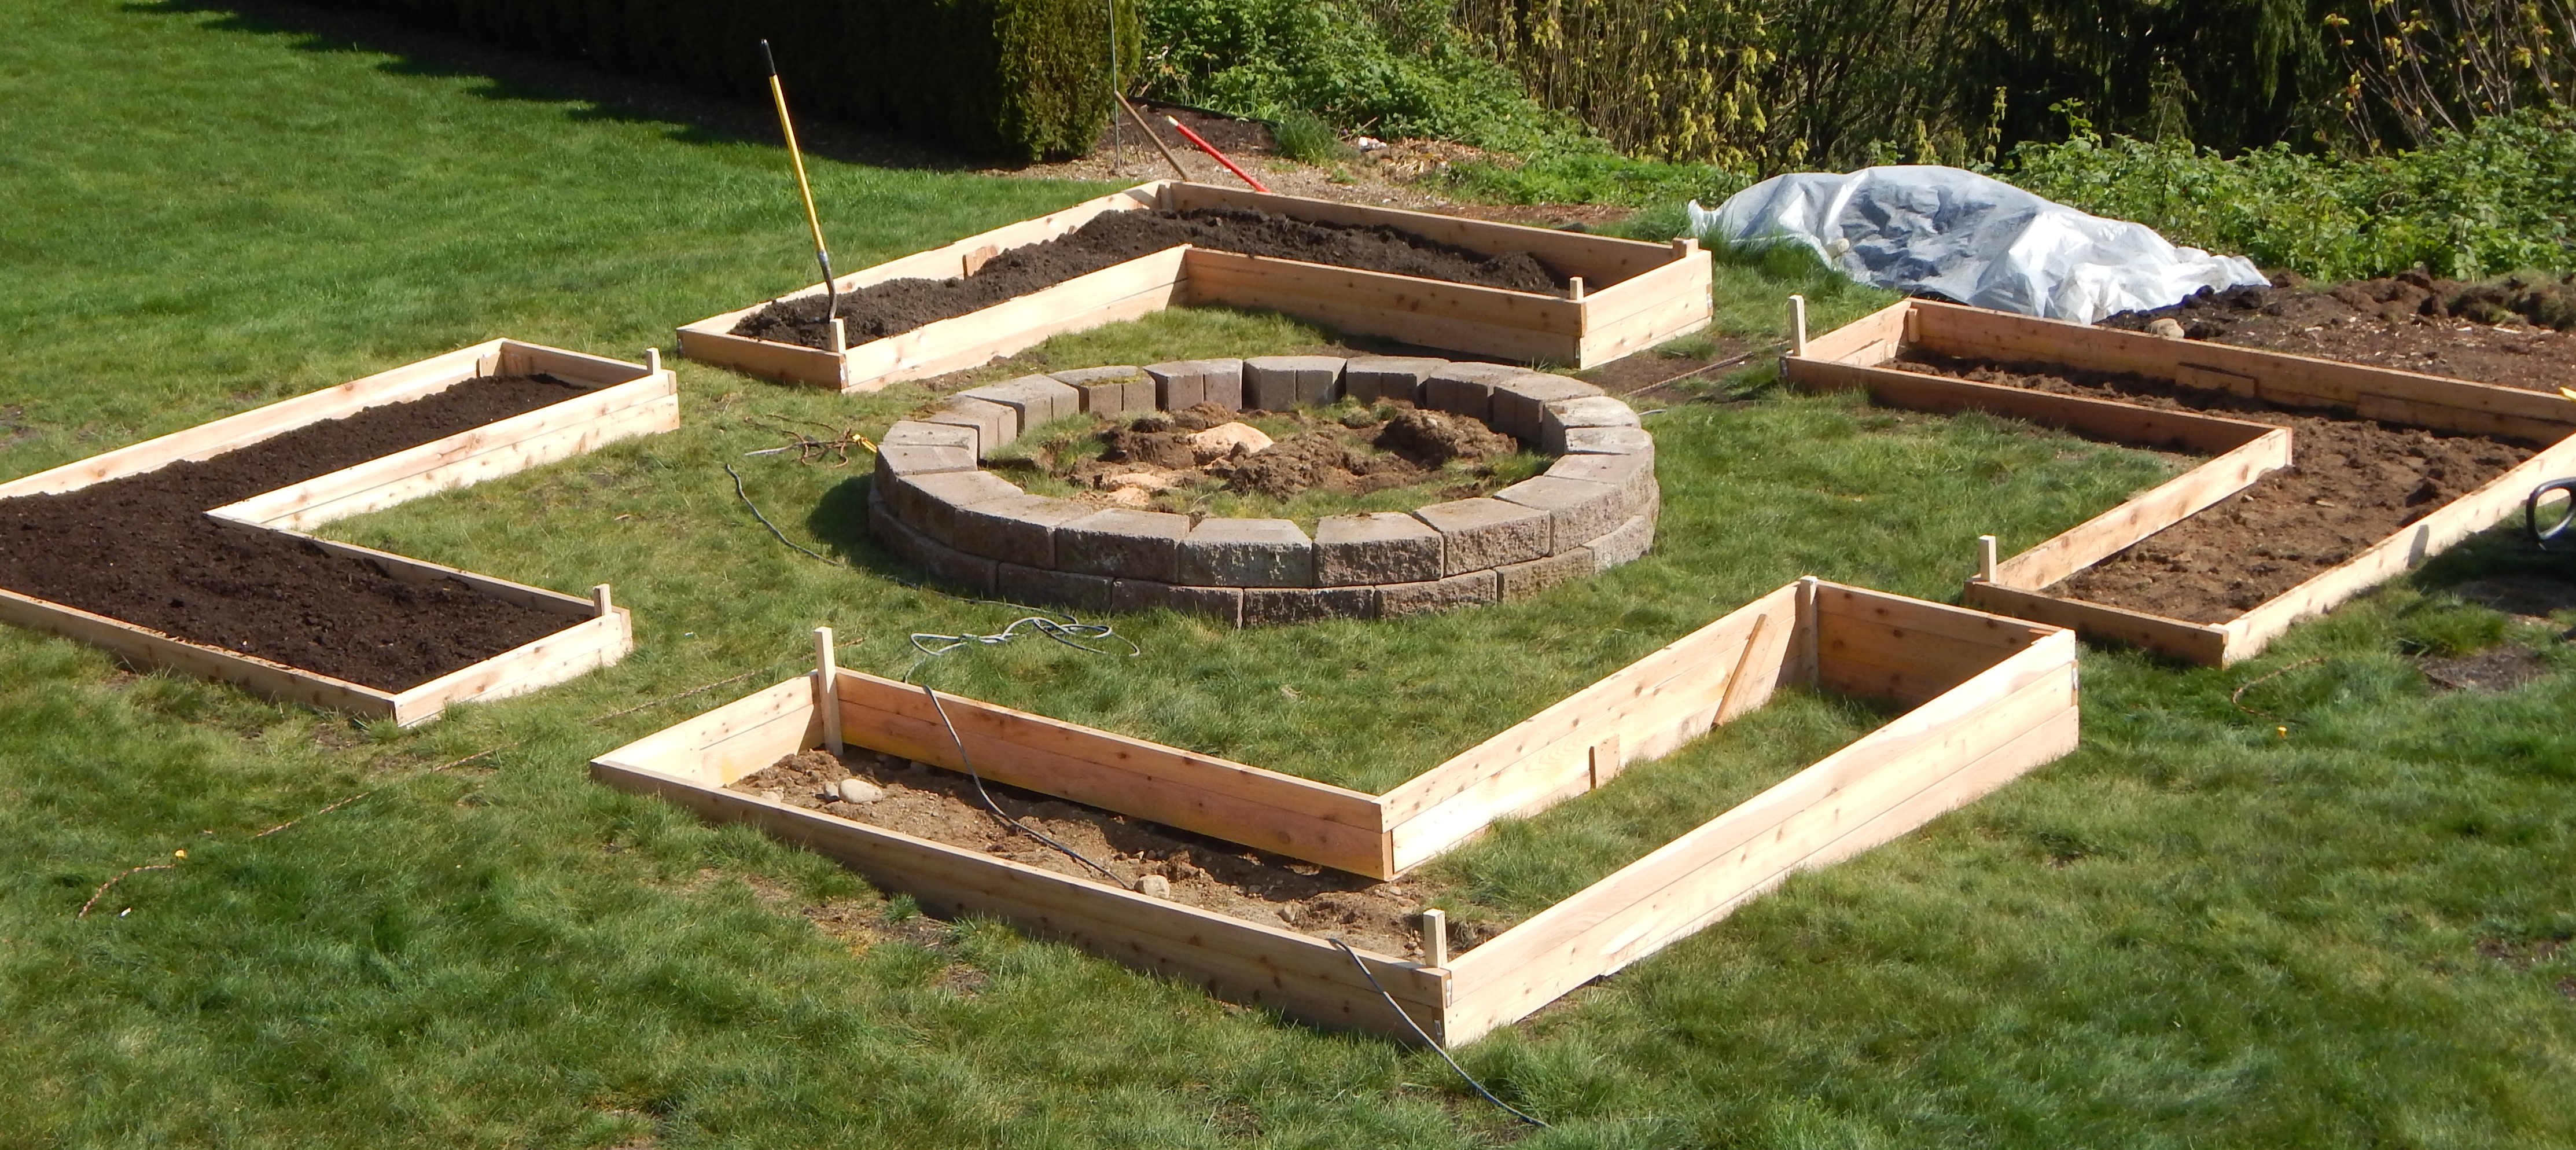 How To Build A Raised Garden Bed For Vegetables